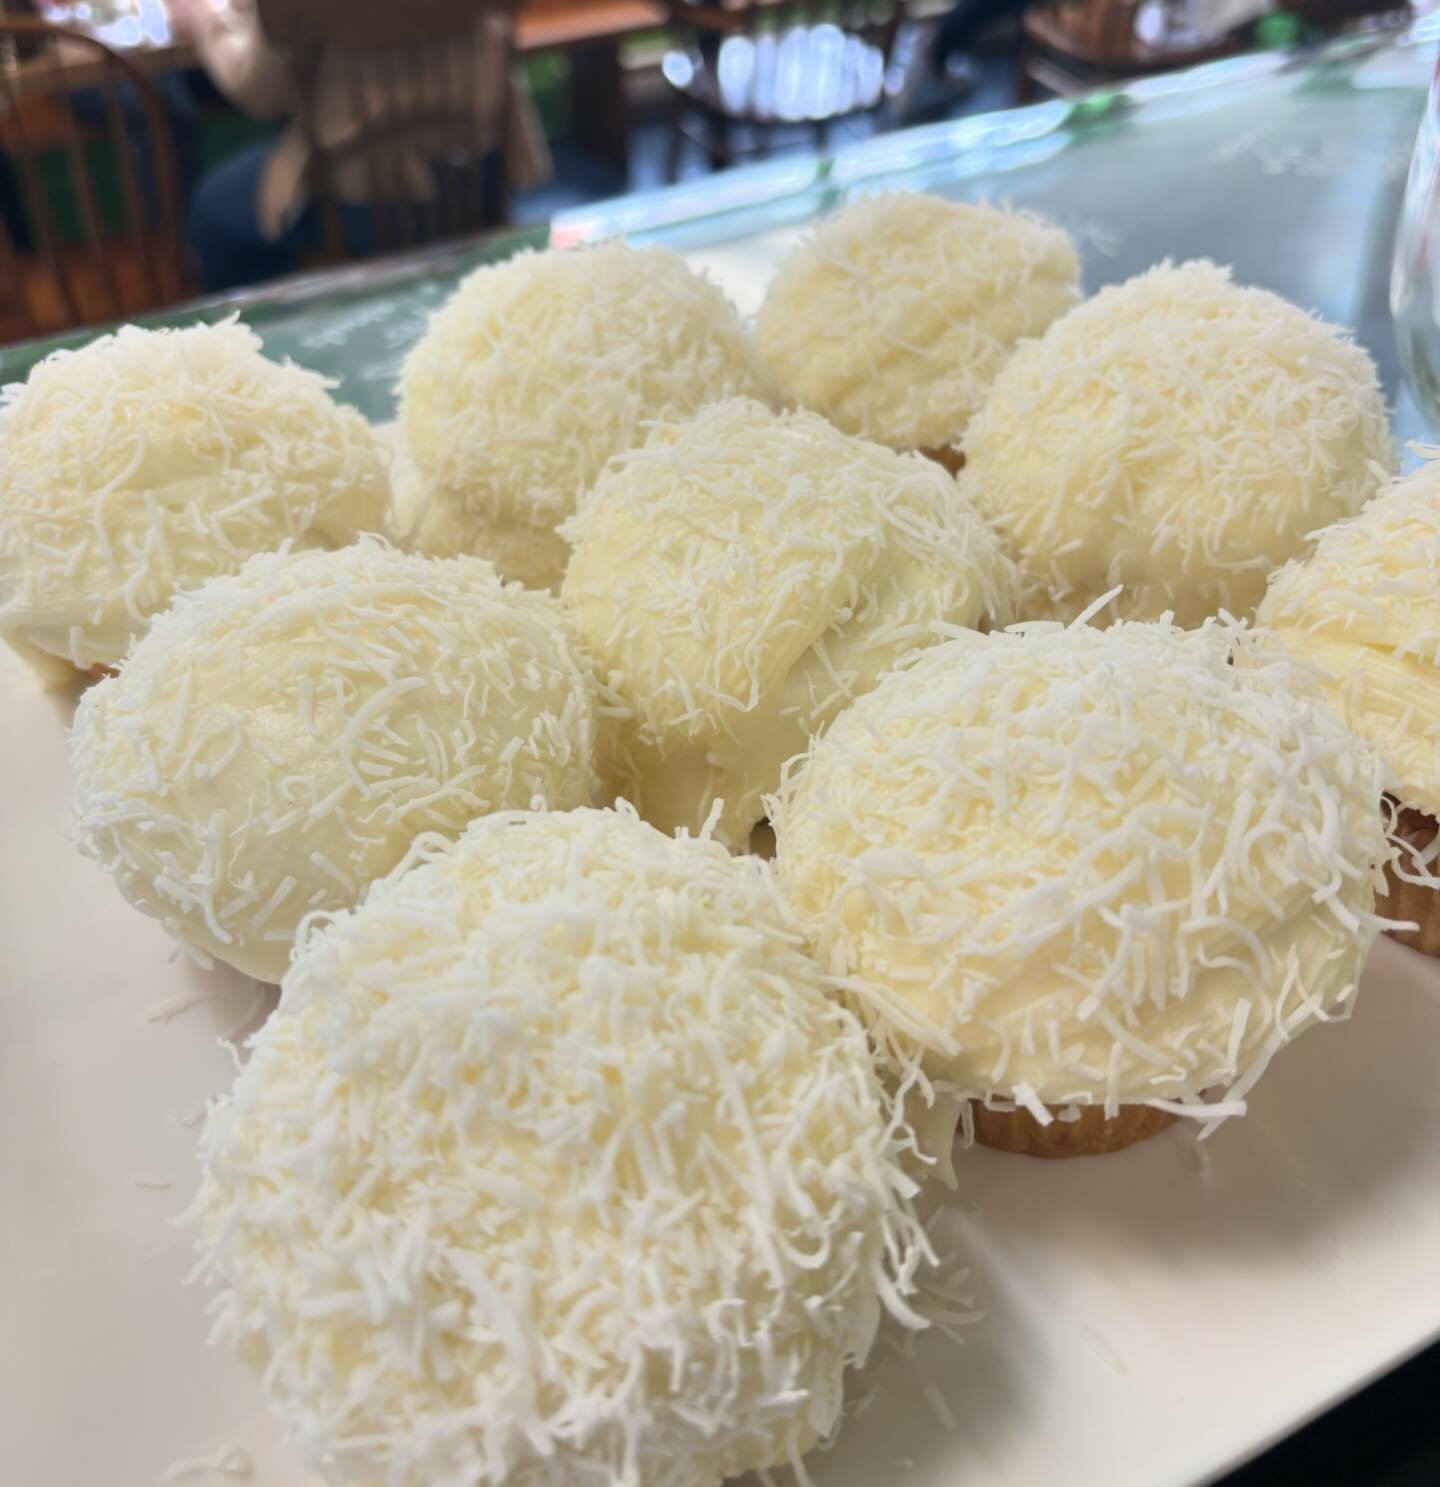 Don&rsquo;t be fooled and think these are snowy mountains! Got some delicious coconut cupcake goodness baked by Lynda this afternoon!!! Yum! 🧁🥥

#coconutdesert #housemade #bakedwithlove